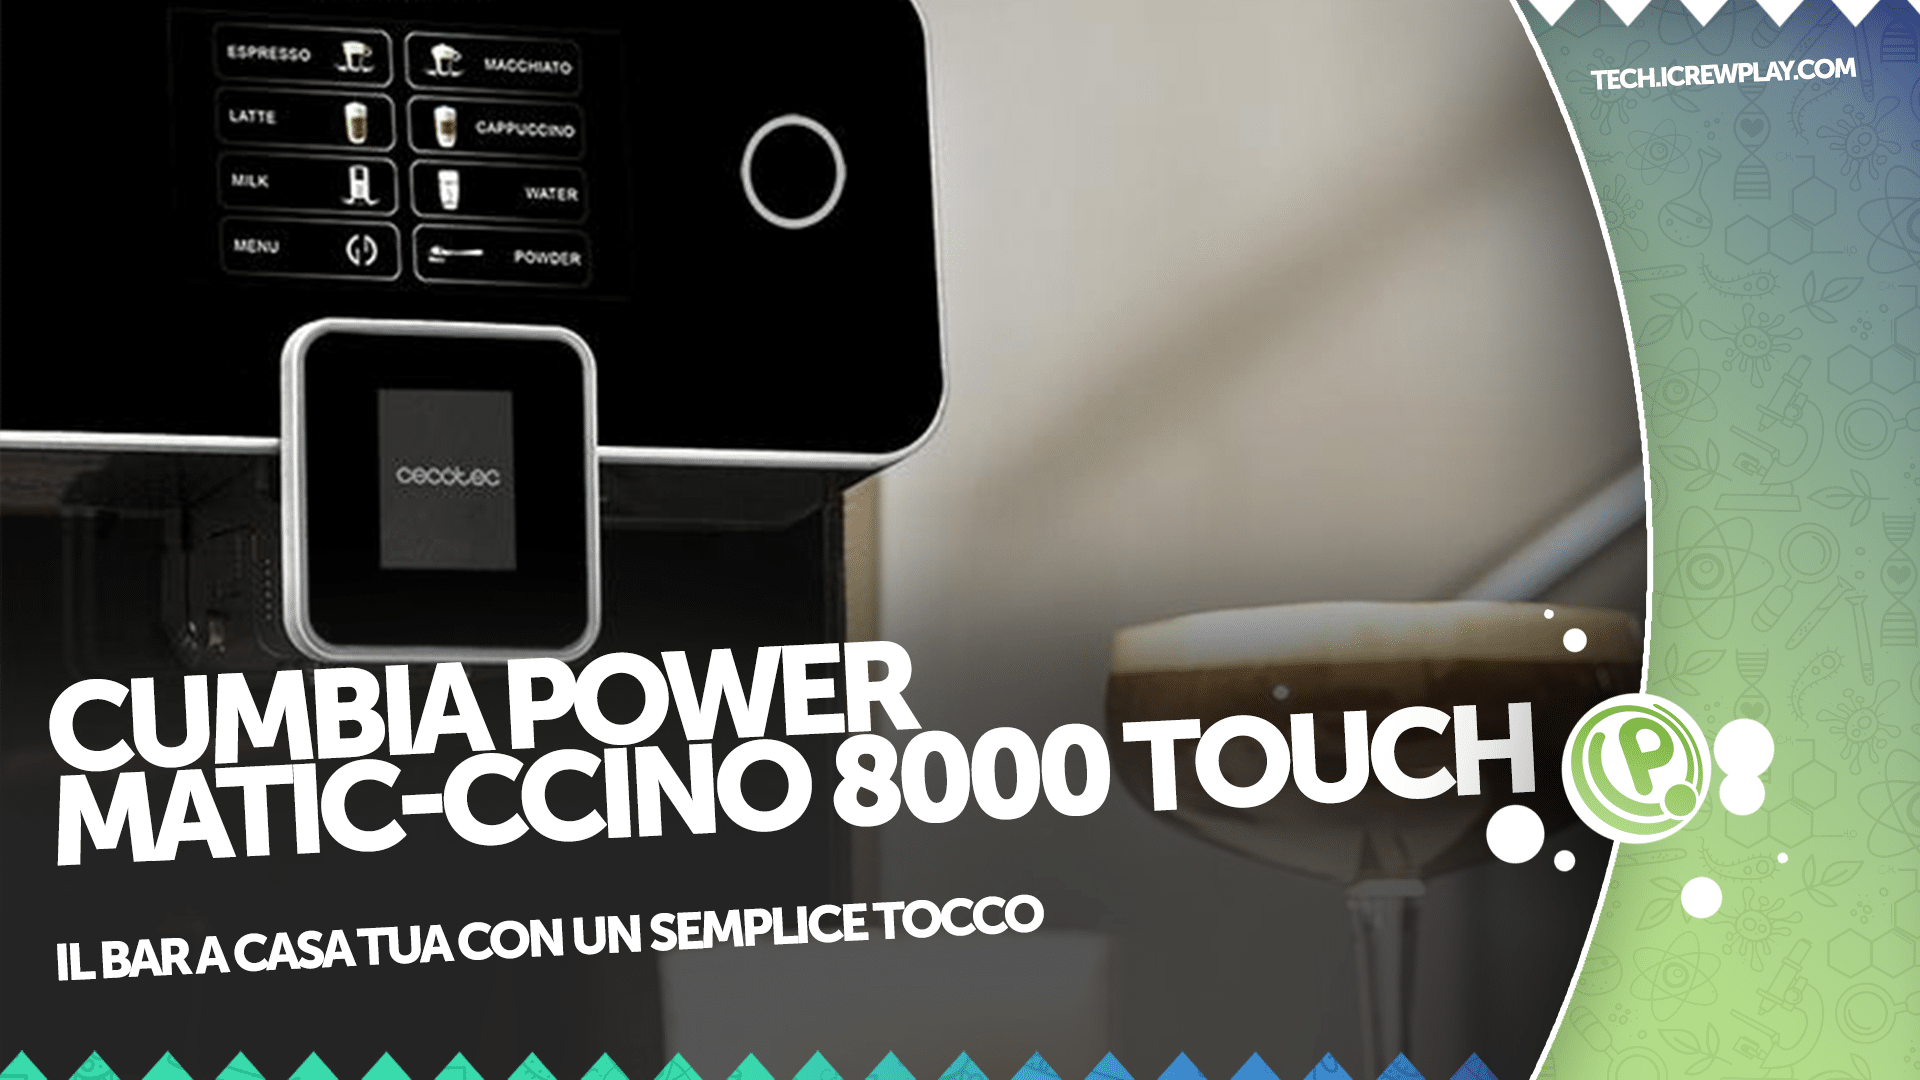 Cumbia Power Matic-ccino 8000 Touch